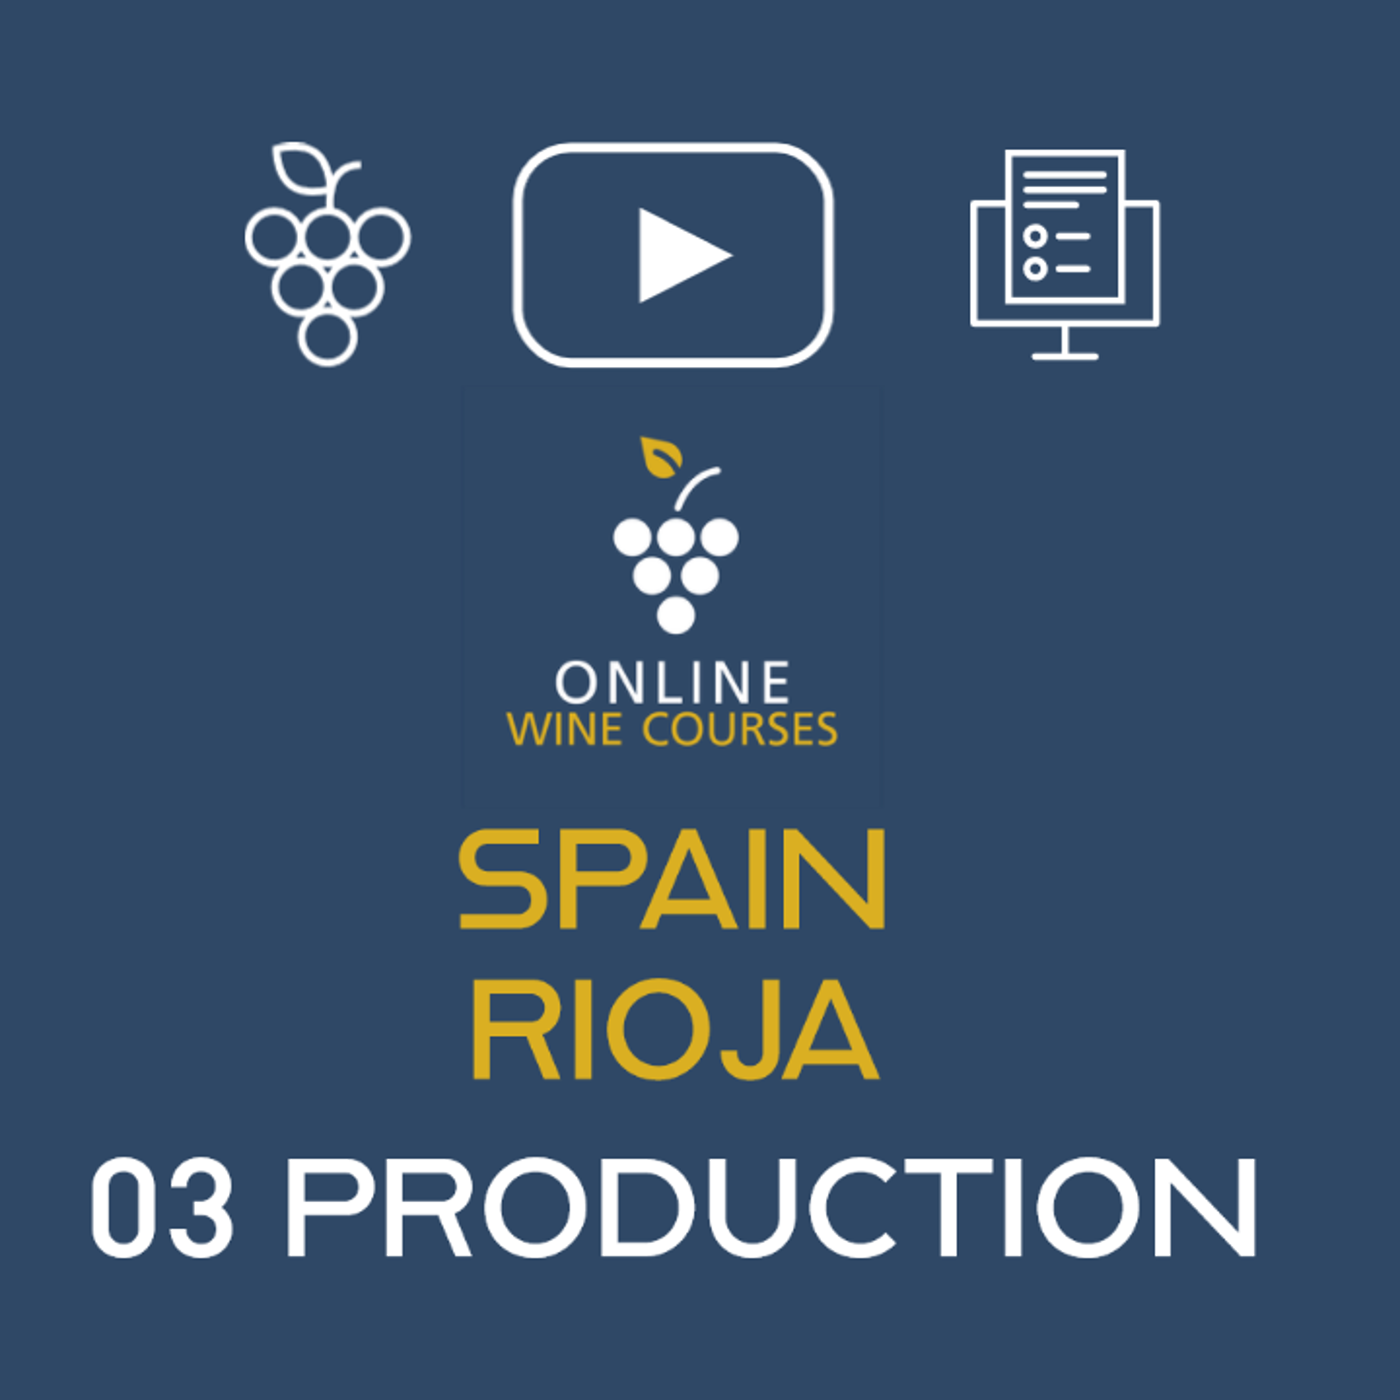 🍇Online Wine Courses | Spain - Rioja 03 Production